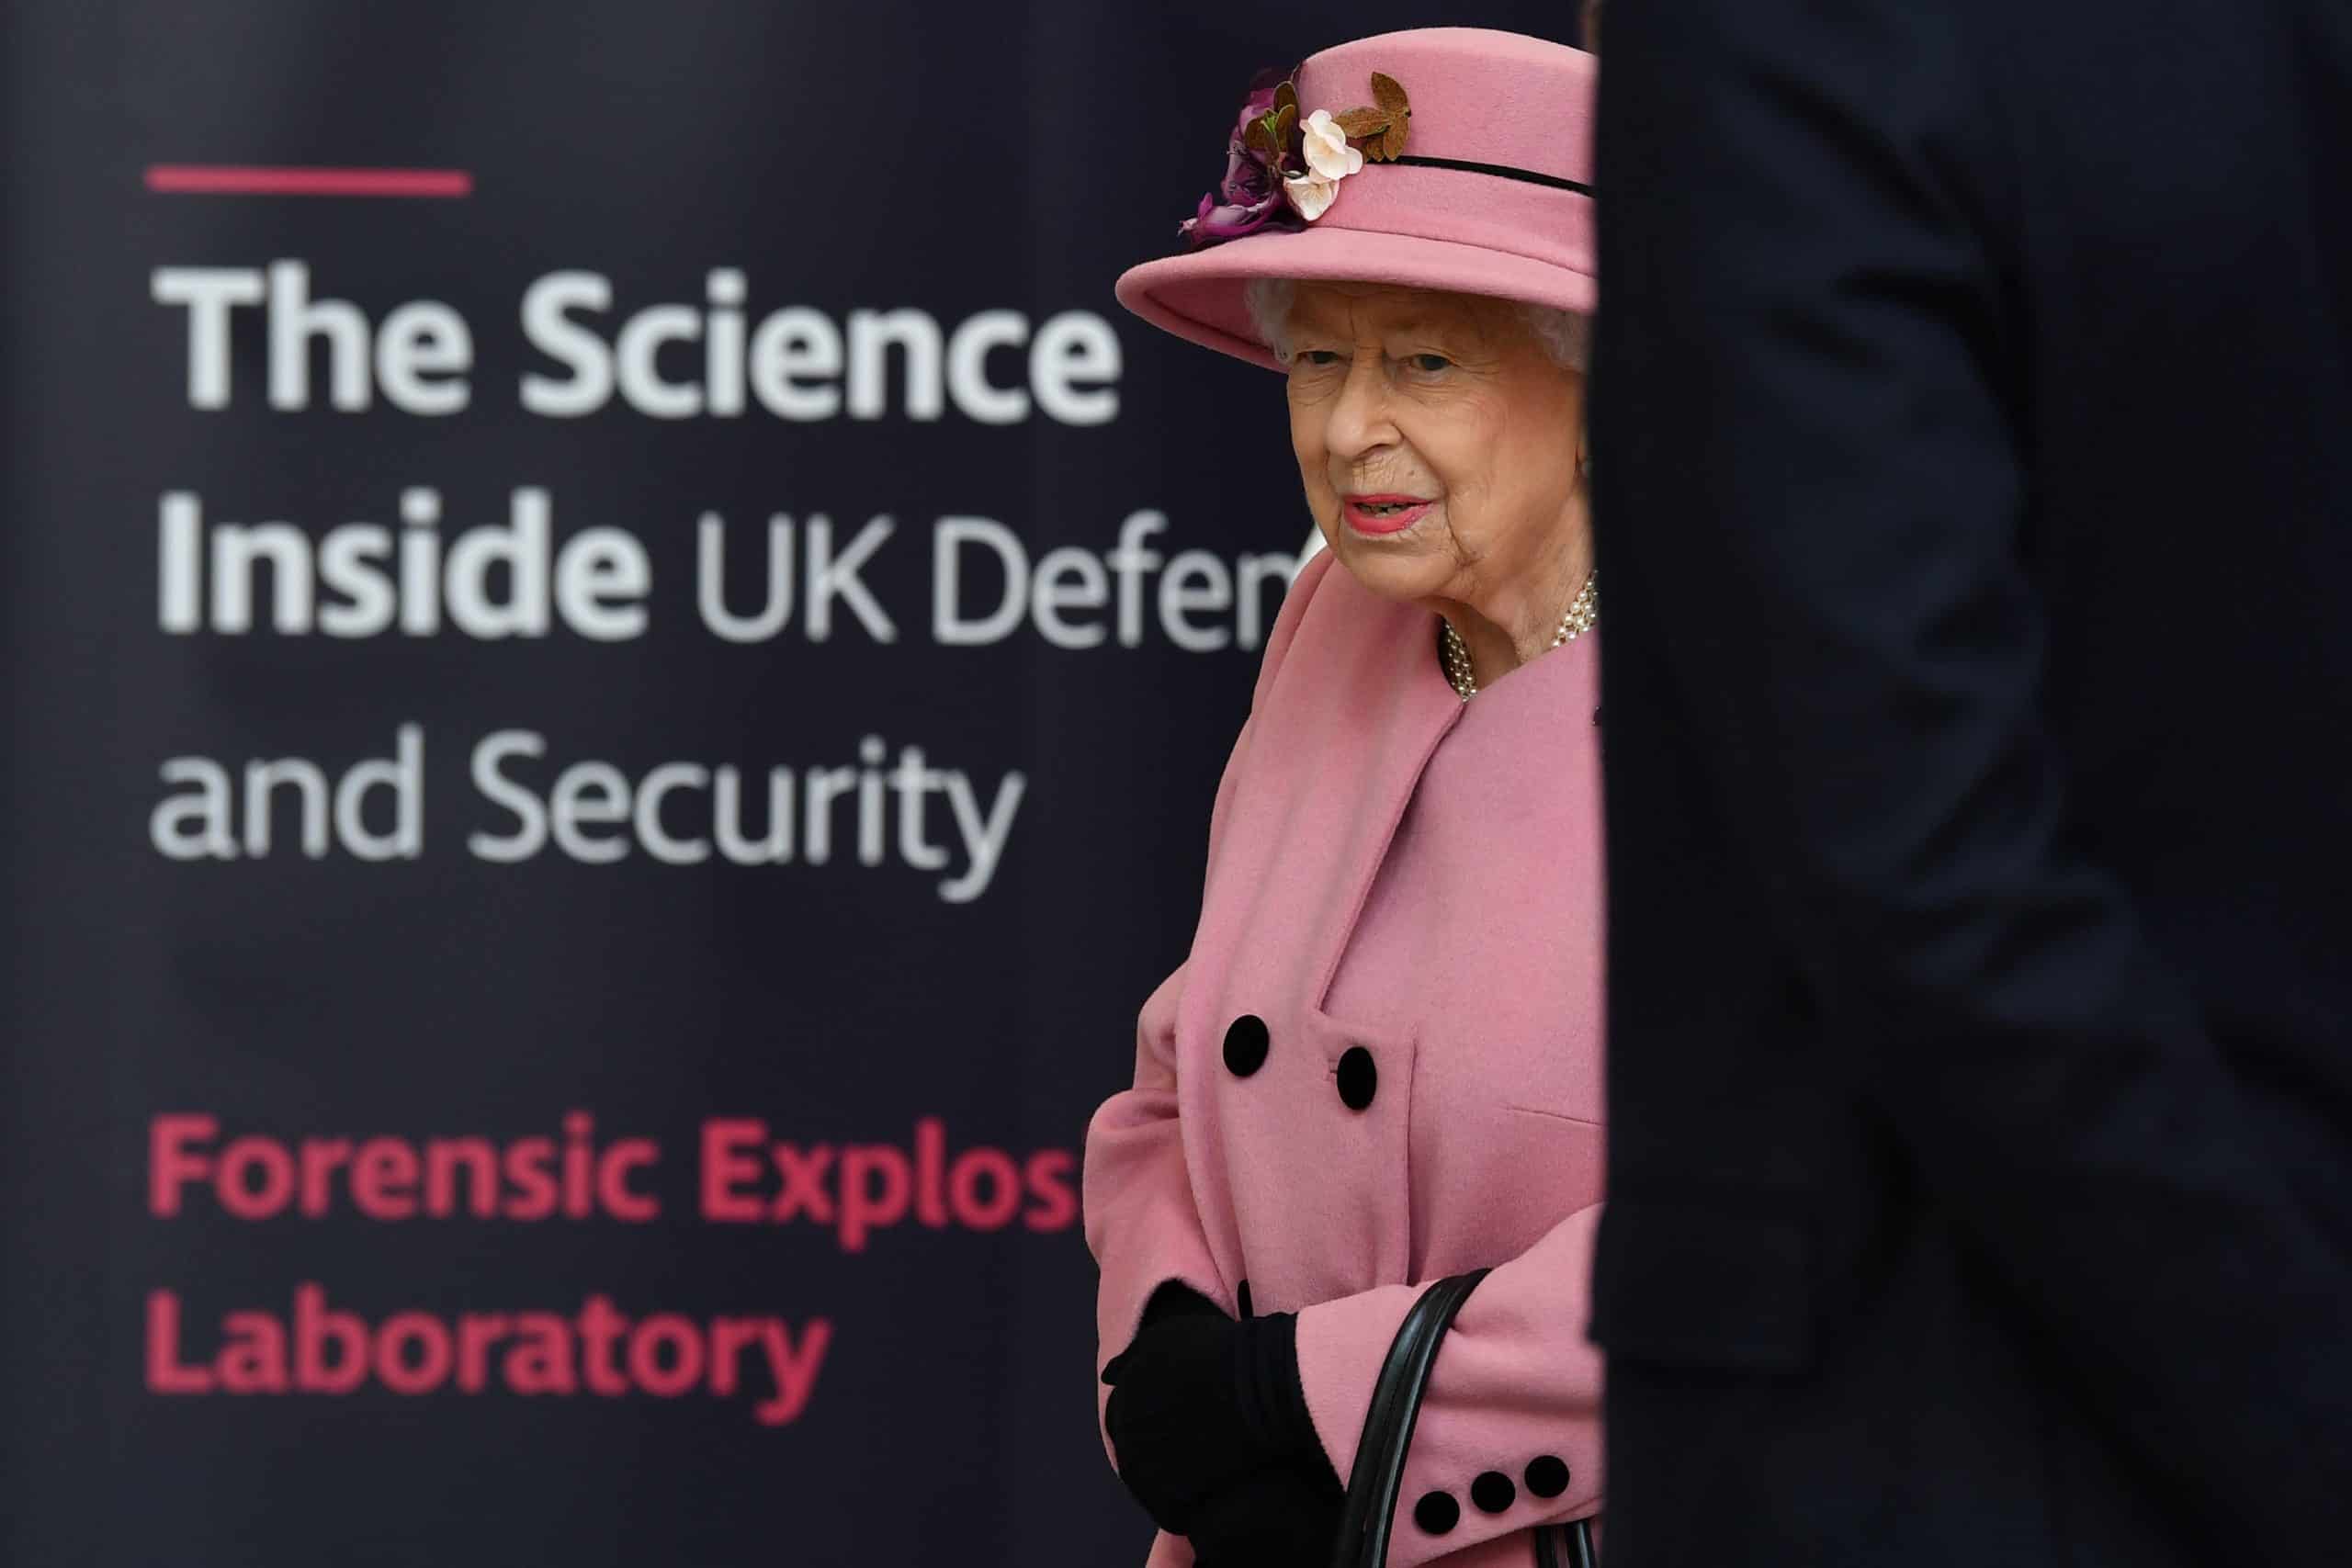 ‘They talk but don’t do’: Queen slams climate ditherers in leaked audio